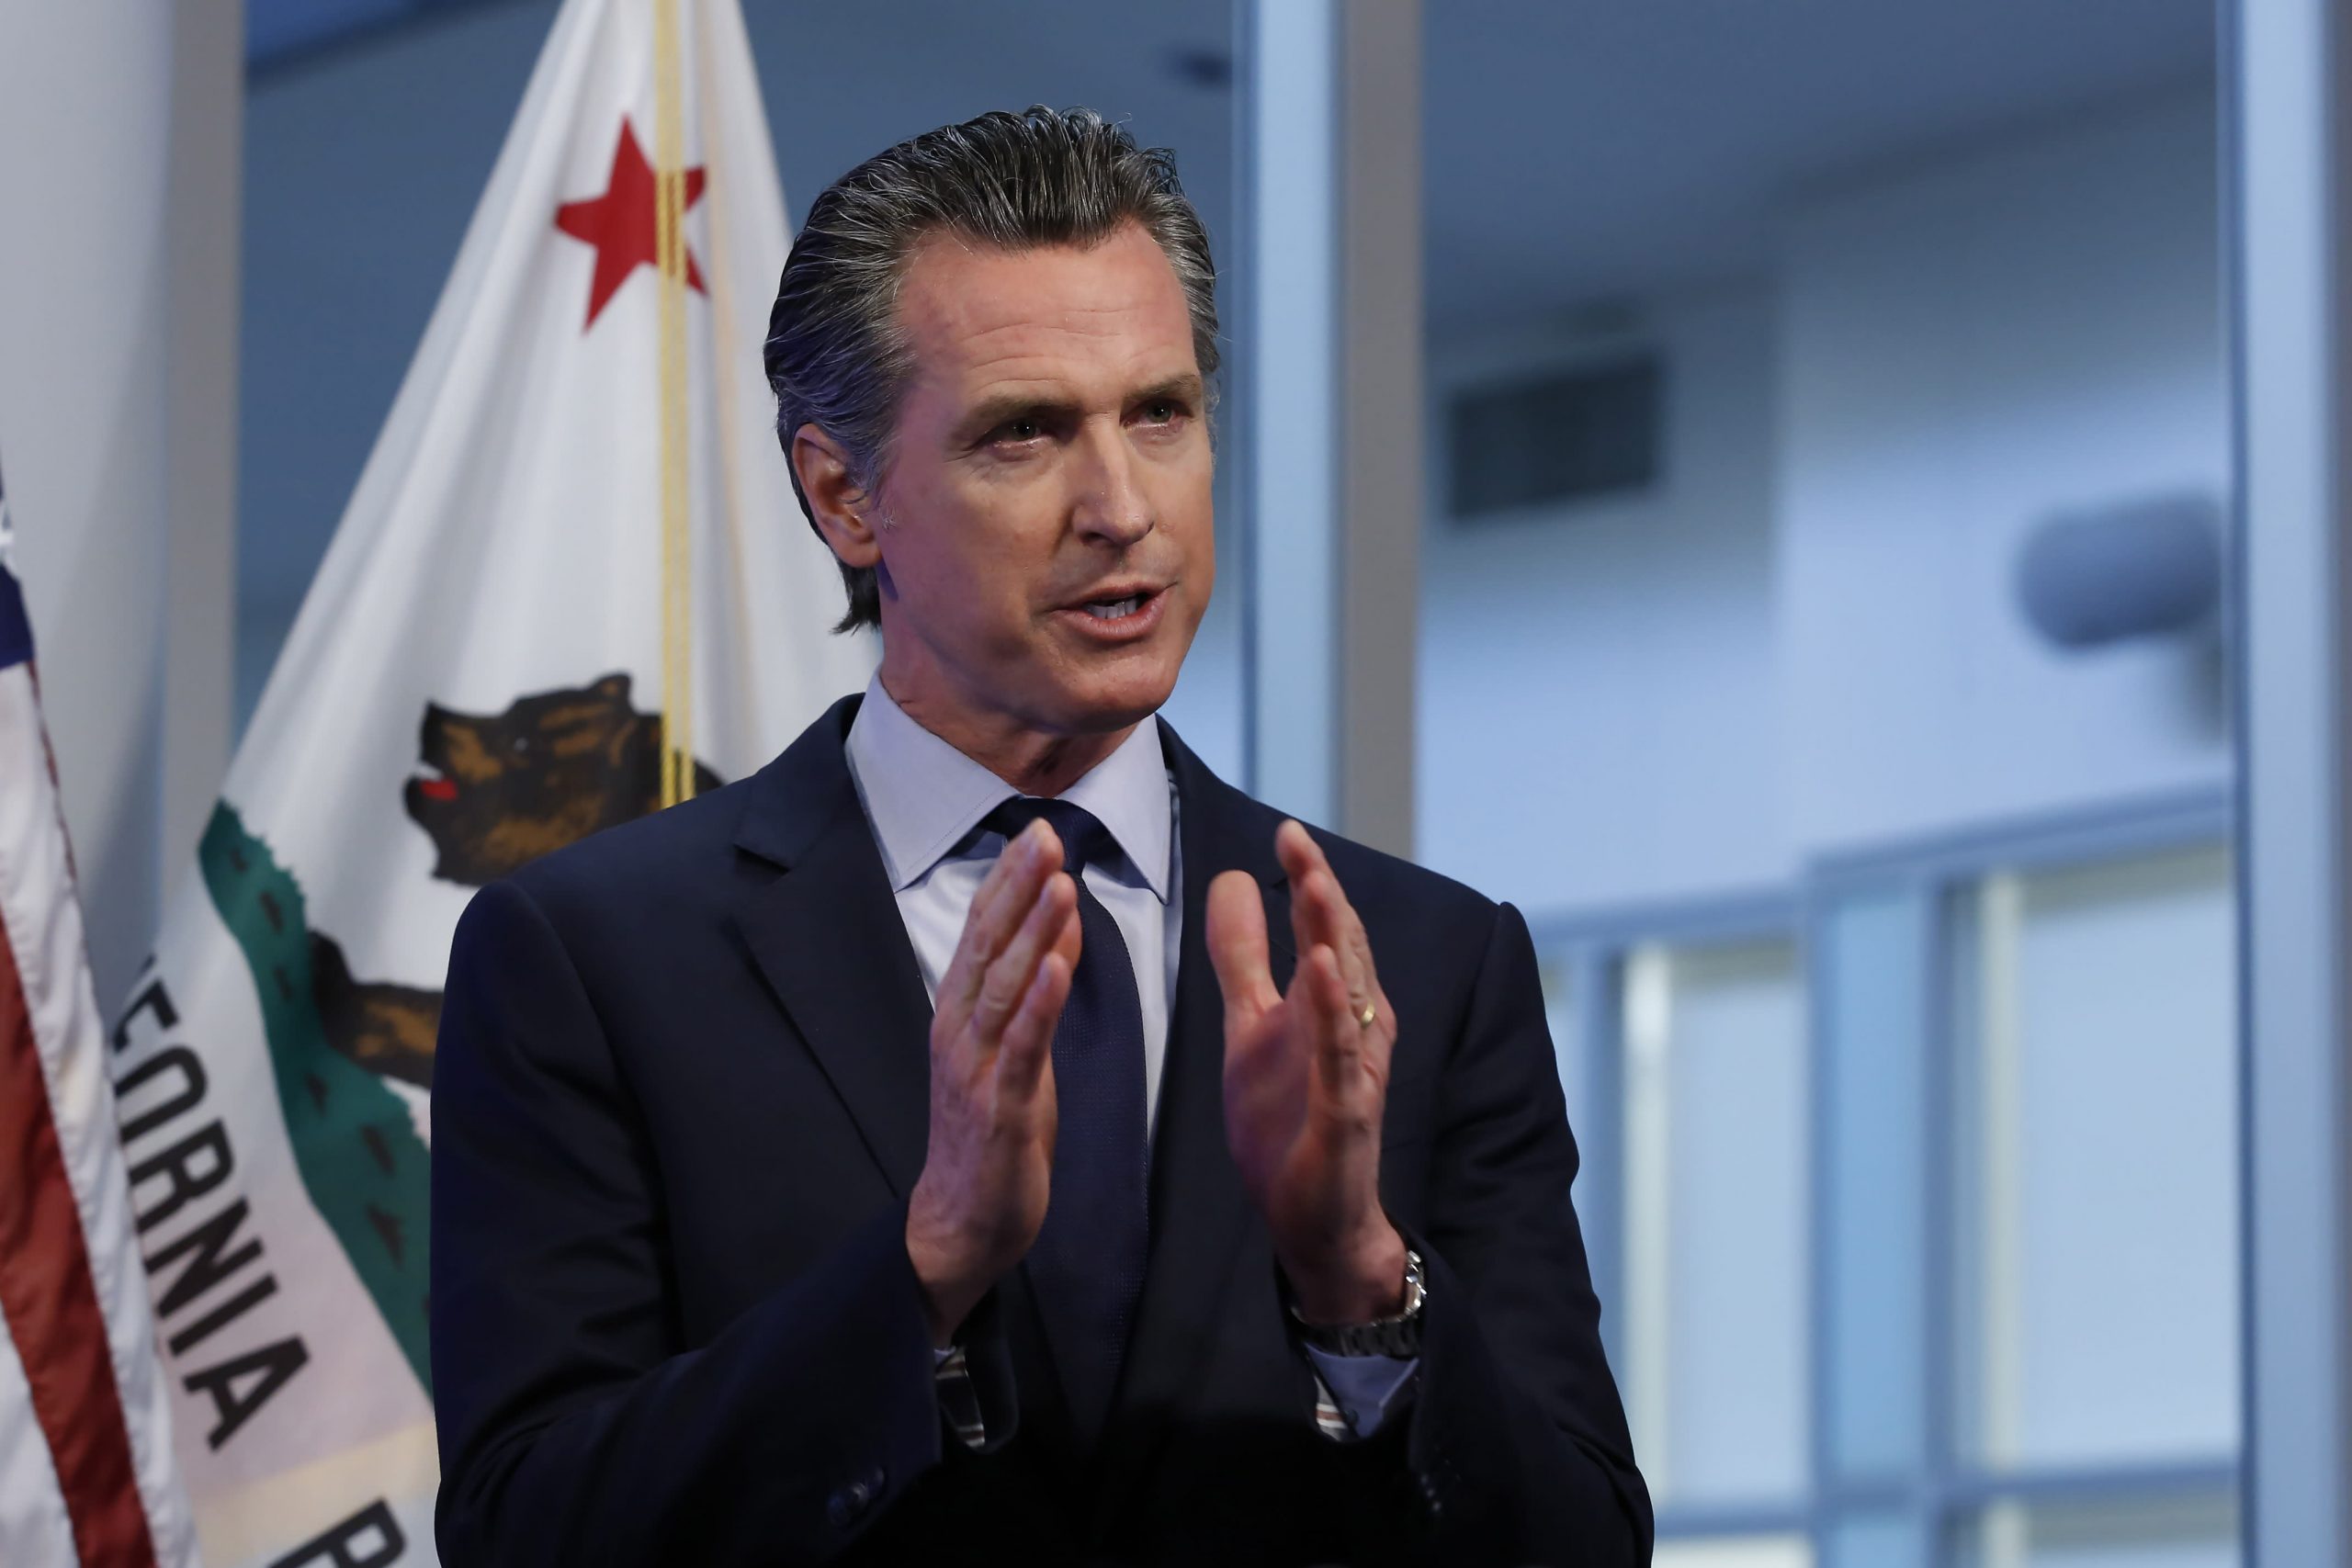 California governor cancels Covid briefing over security considerations